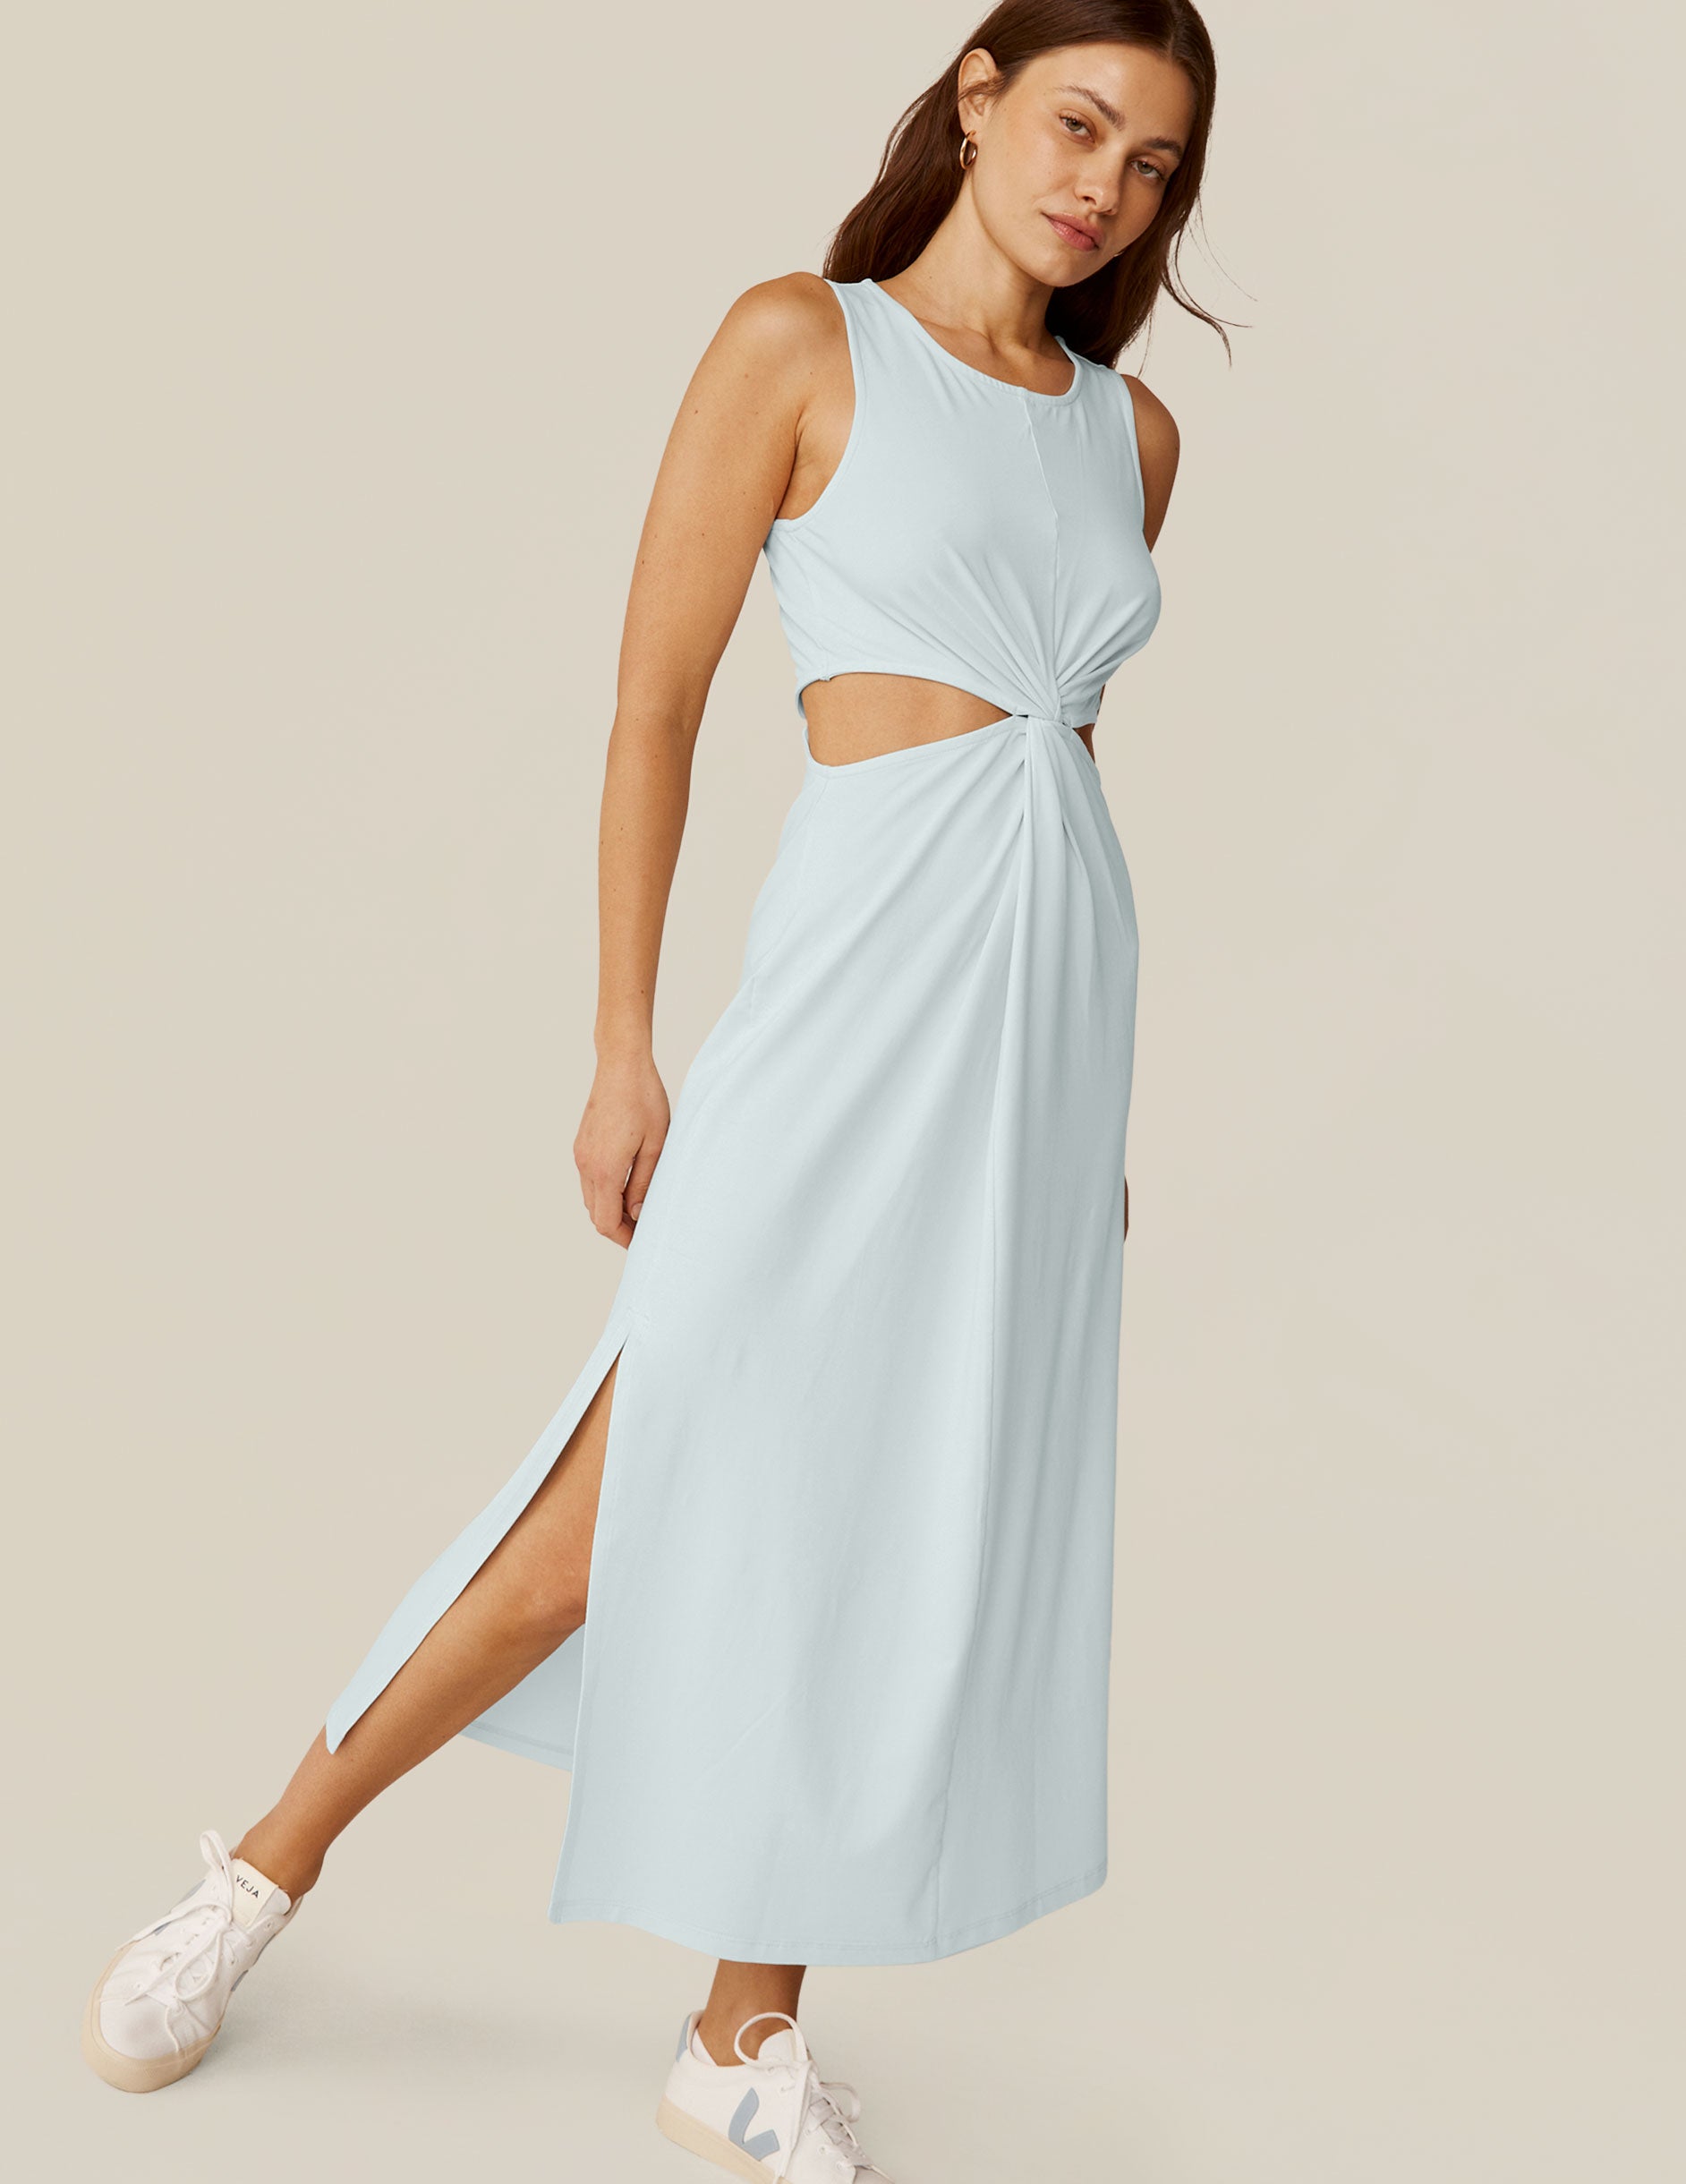 model is wearing a blue tank top maxi dress with a twist detailing and side cutouts. 